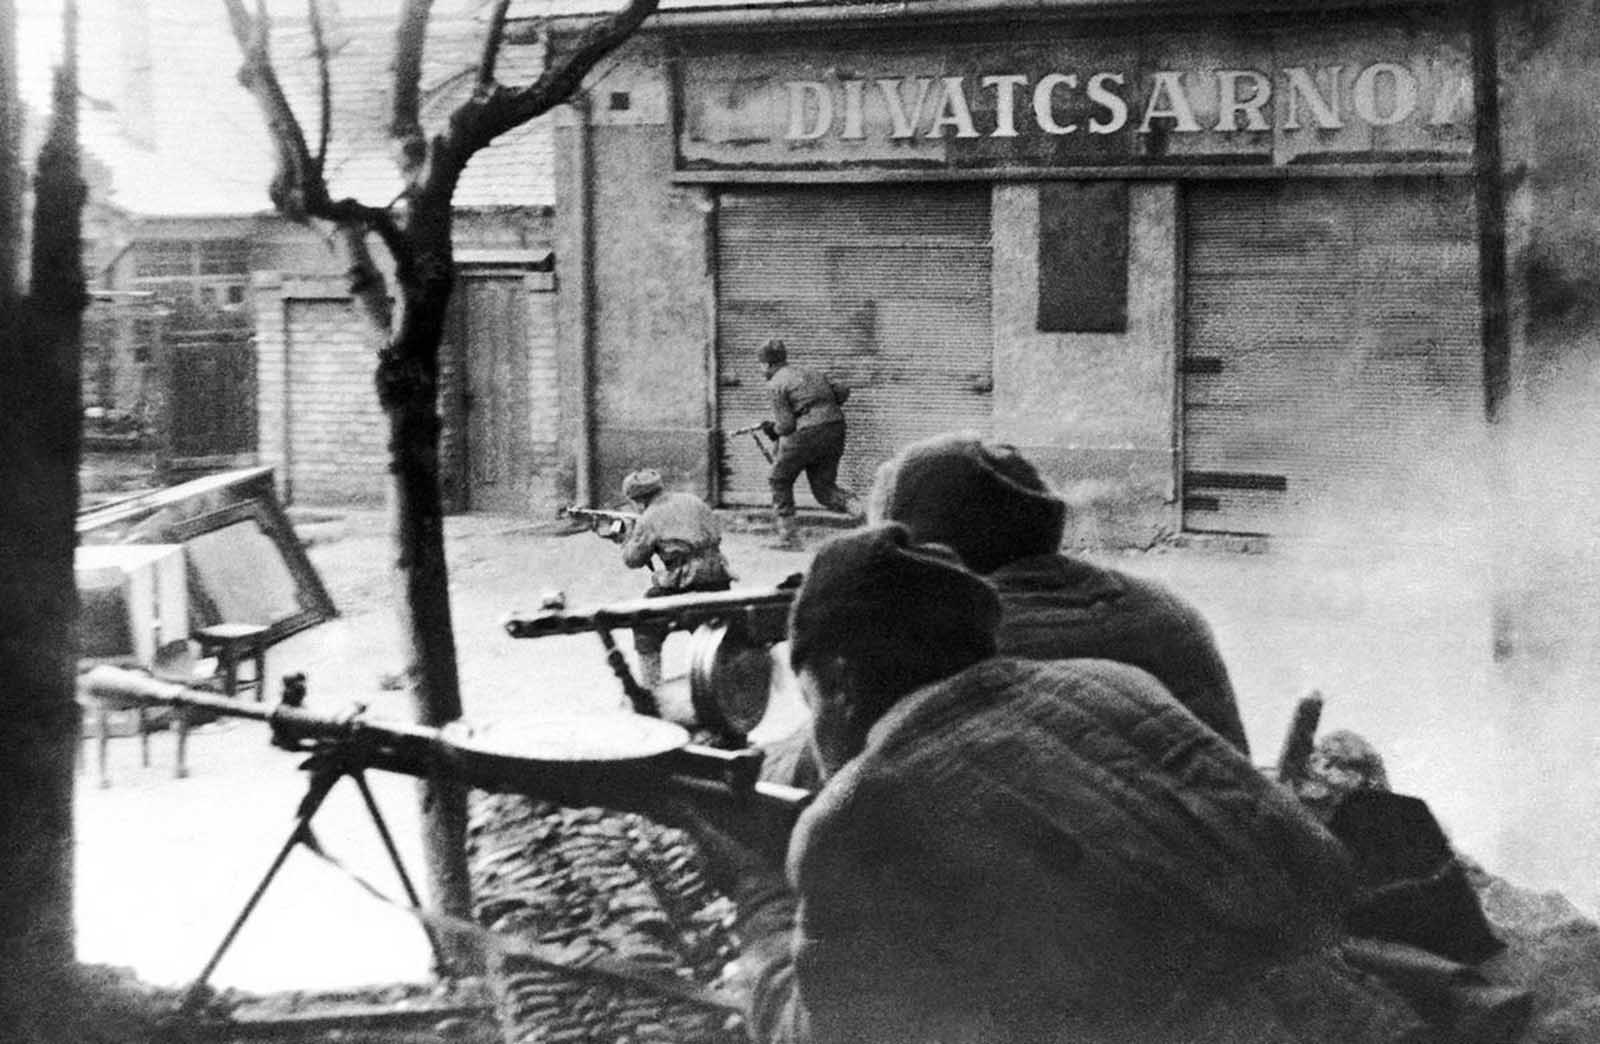 Soviet troops of the 3rd Ukrainian front in action amid the buildings of the Hungarian capital on February 5, 1945.